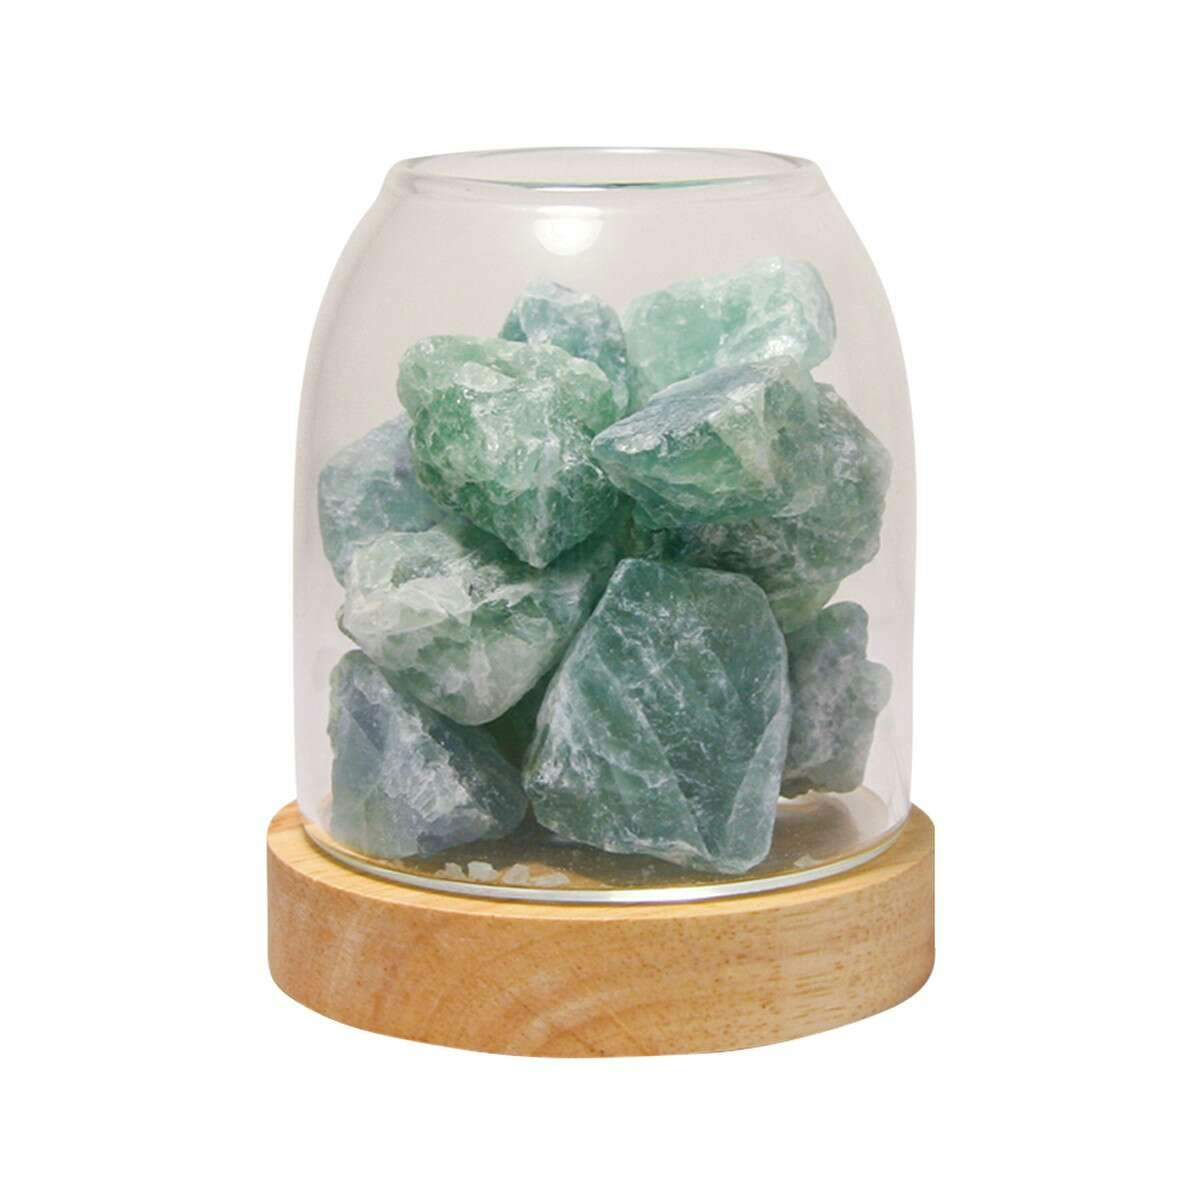 image of Amrita Court Aurora Crystal Diffuser Wooden Base with Light Green Calcite on white background